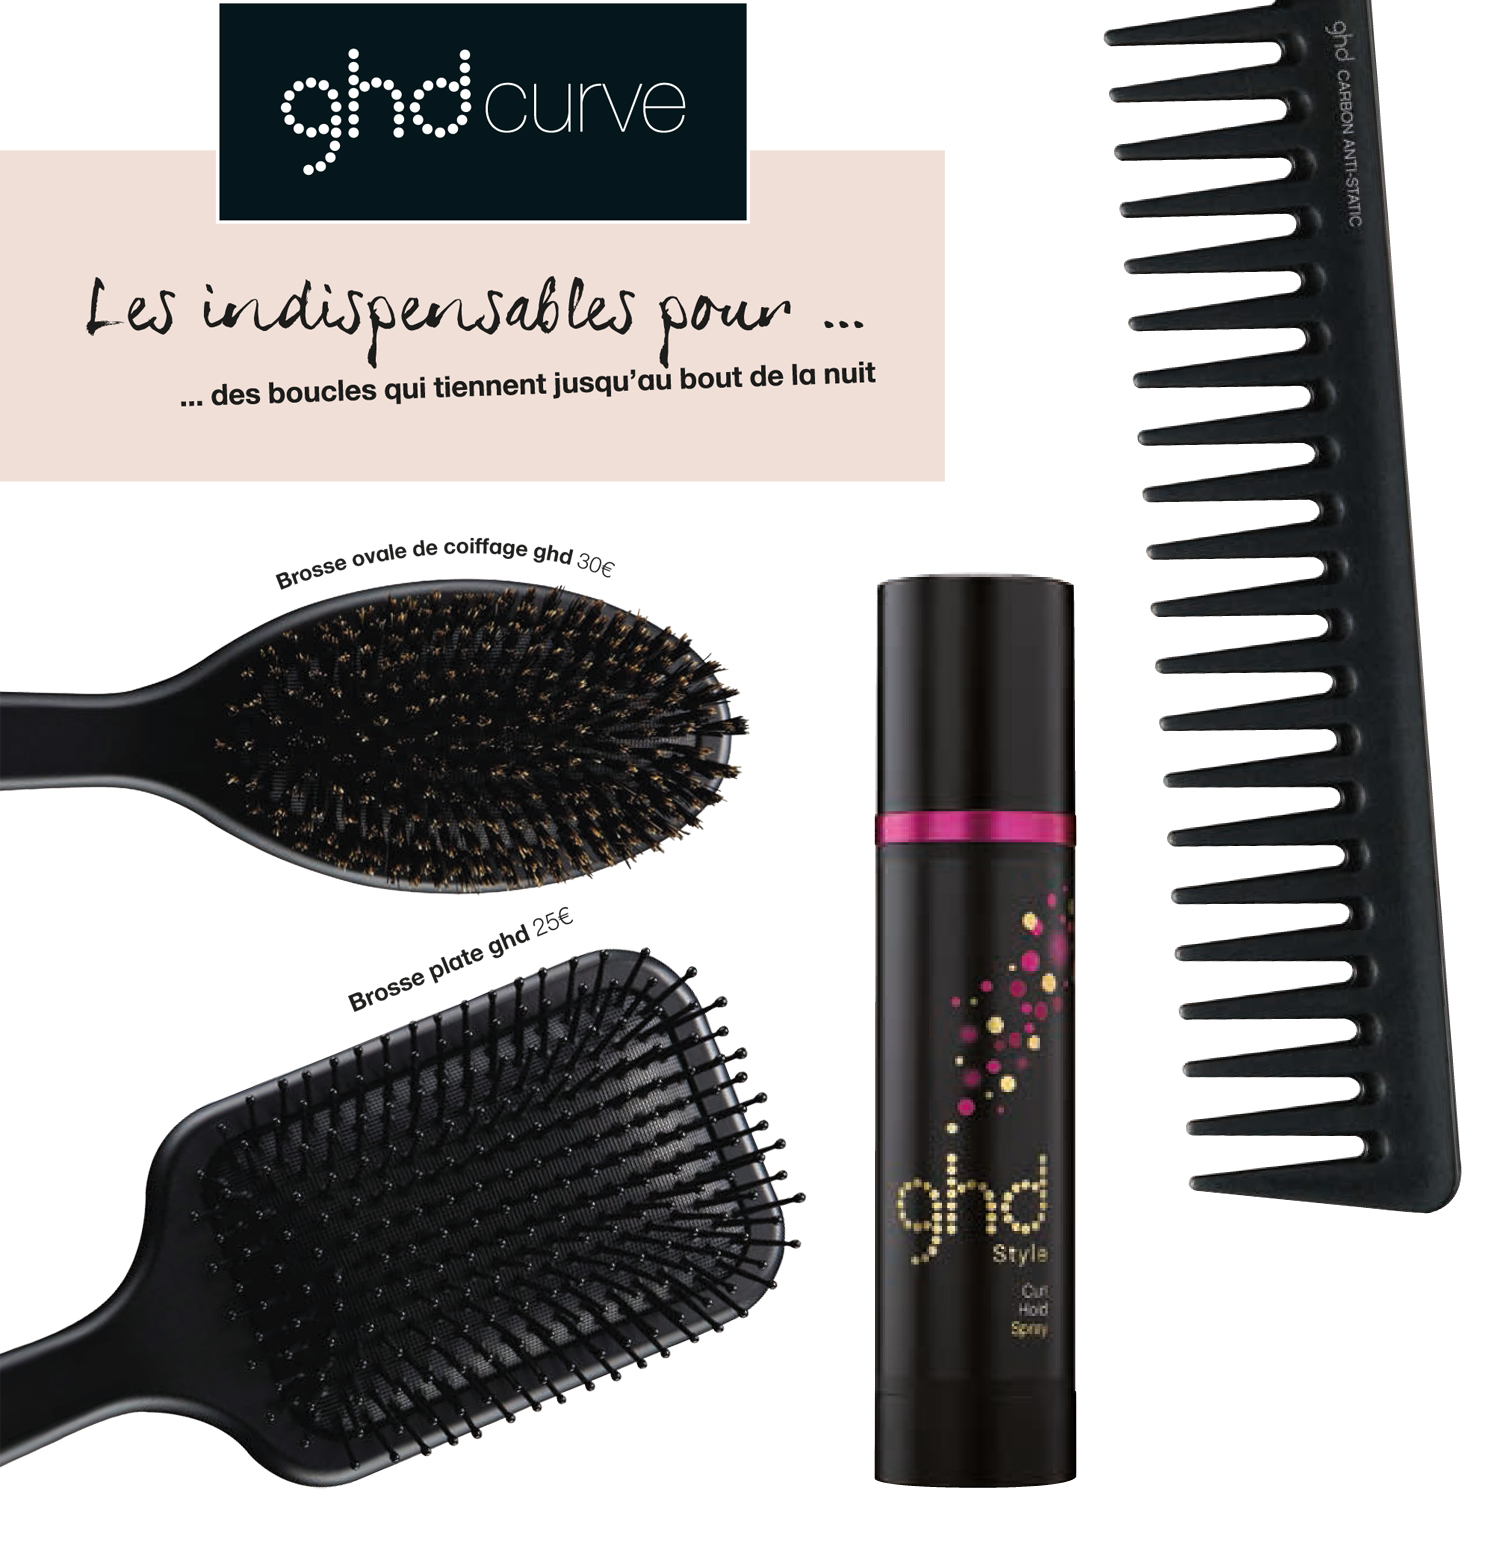 GHD Curve Wands : To obtain natural curls and undulations !